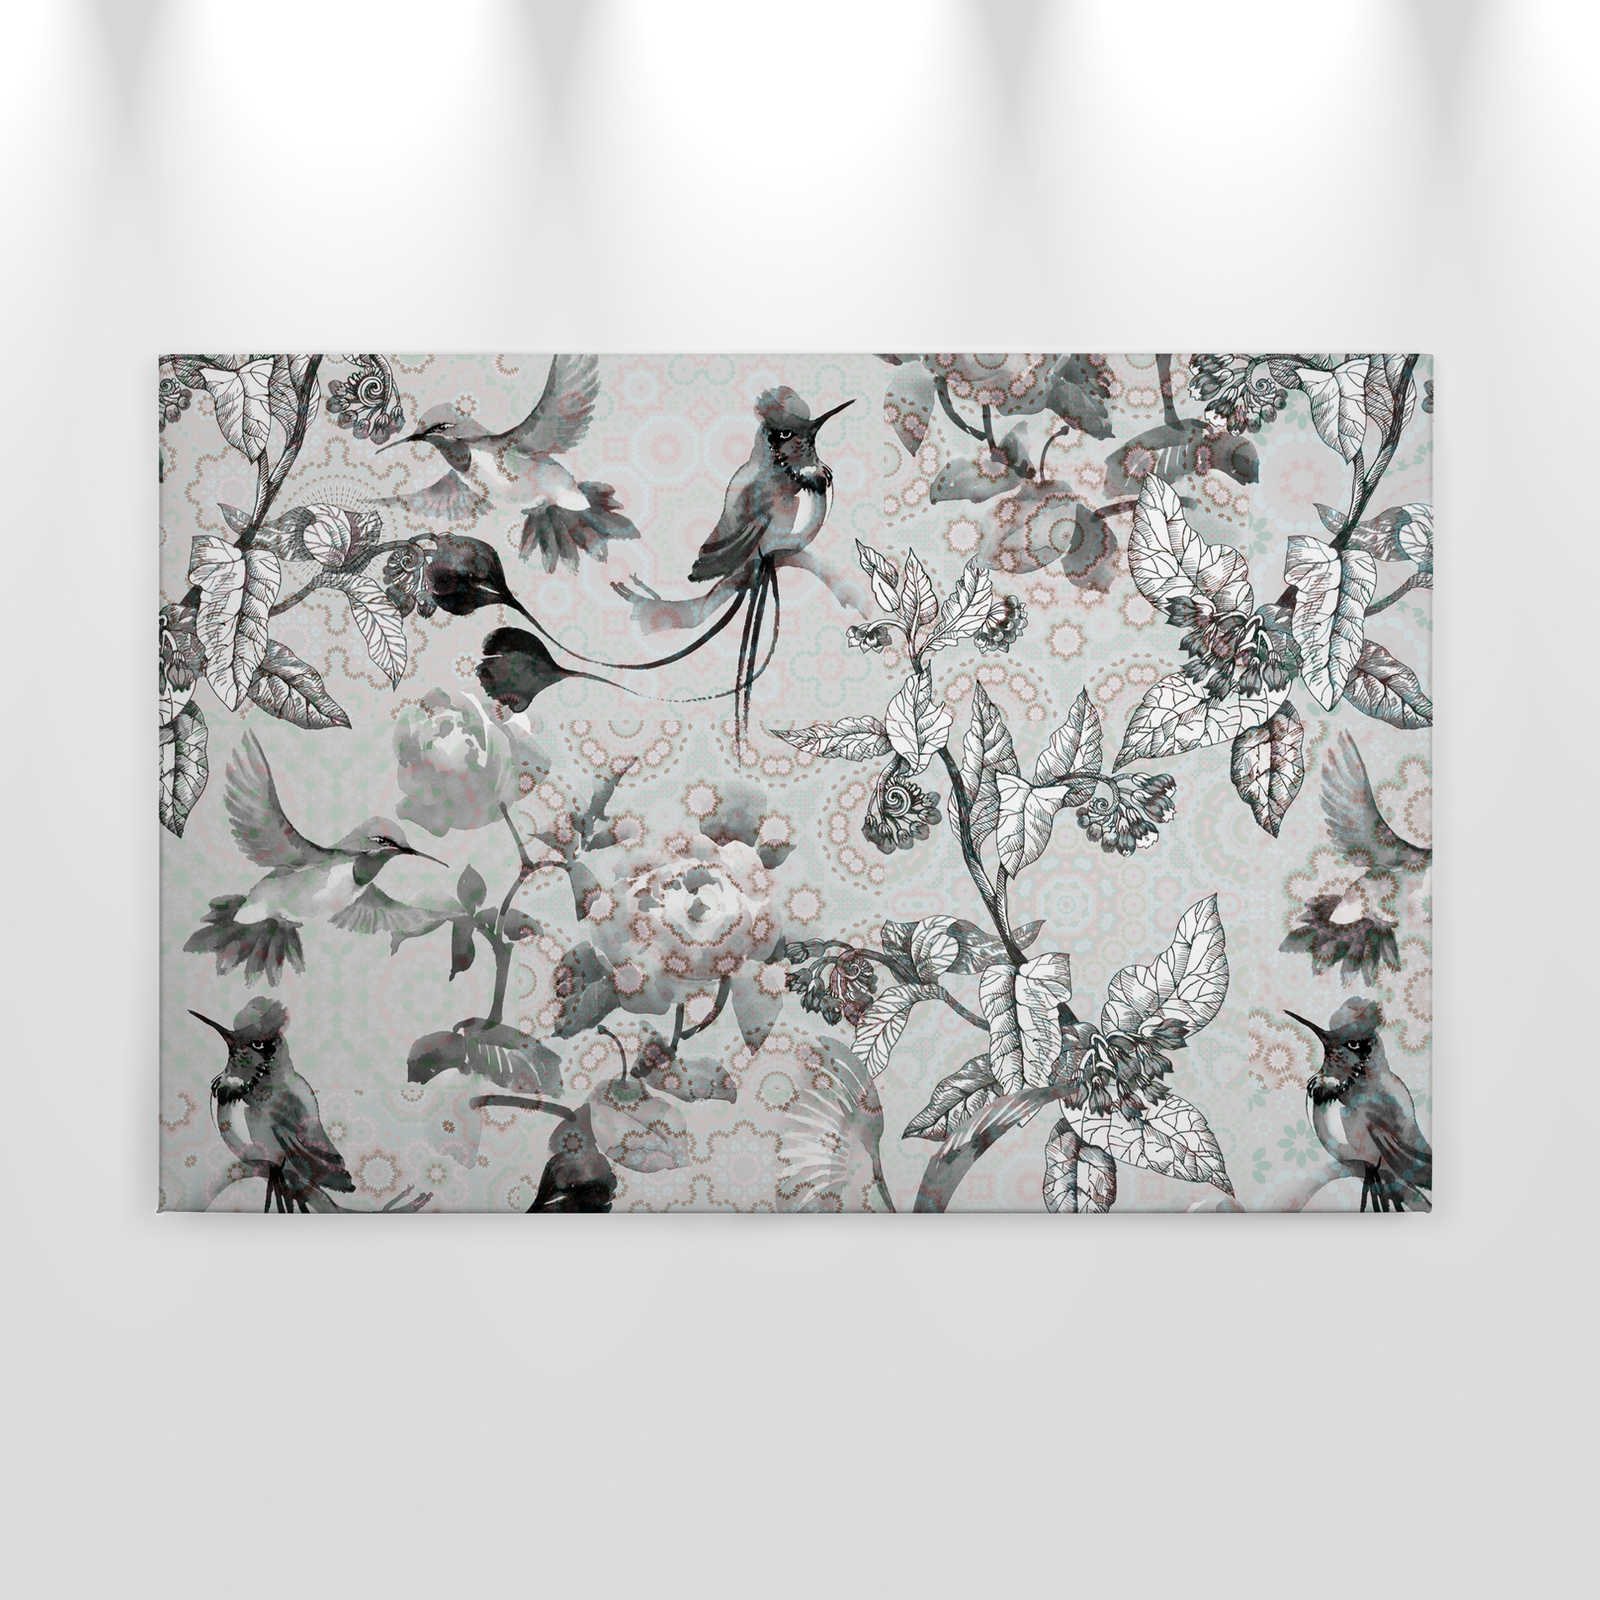             Canvas painting Nature Design in collage style | exotic mosaic 4 - 0,90 m x 0,60 m
        